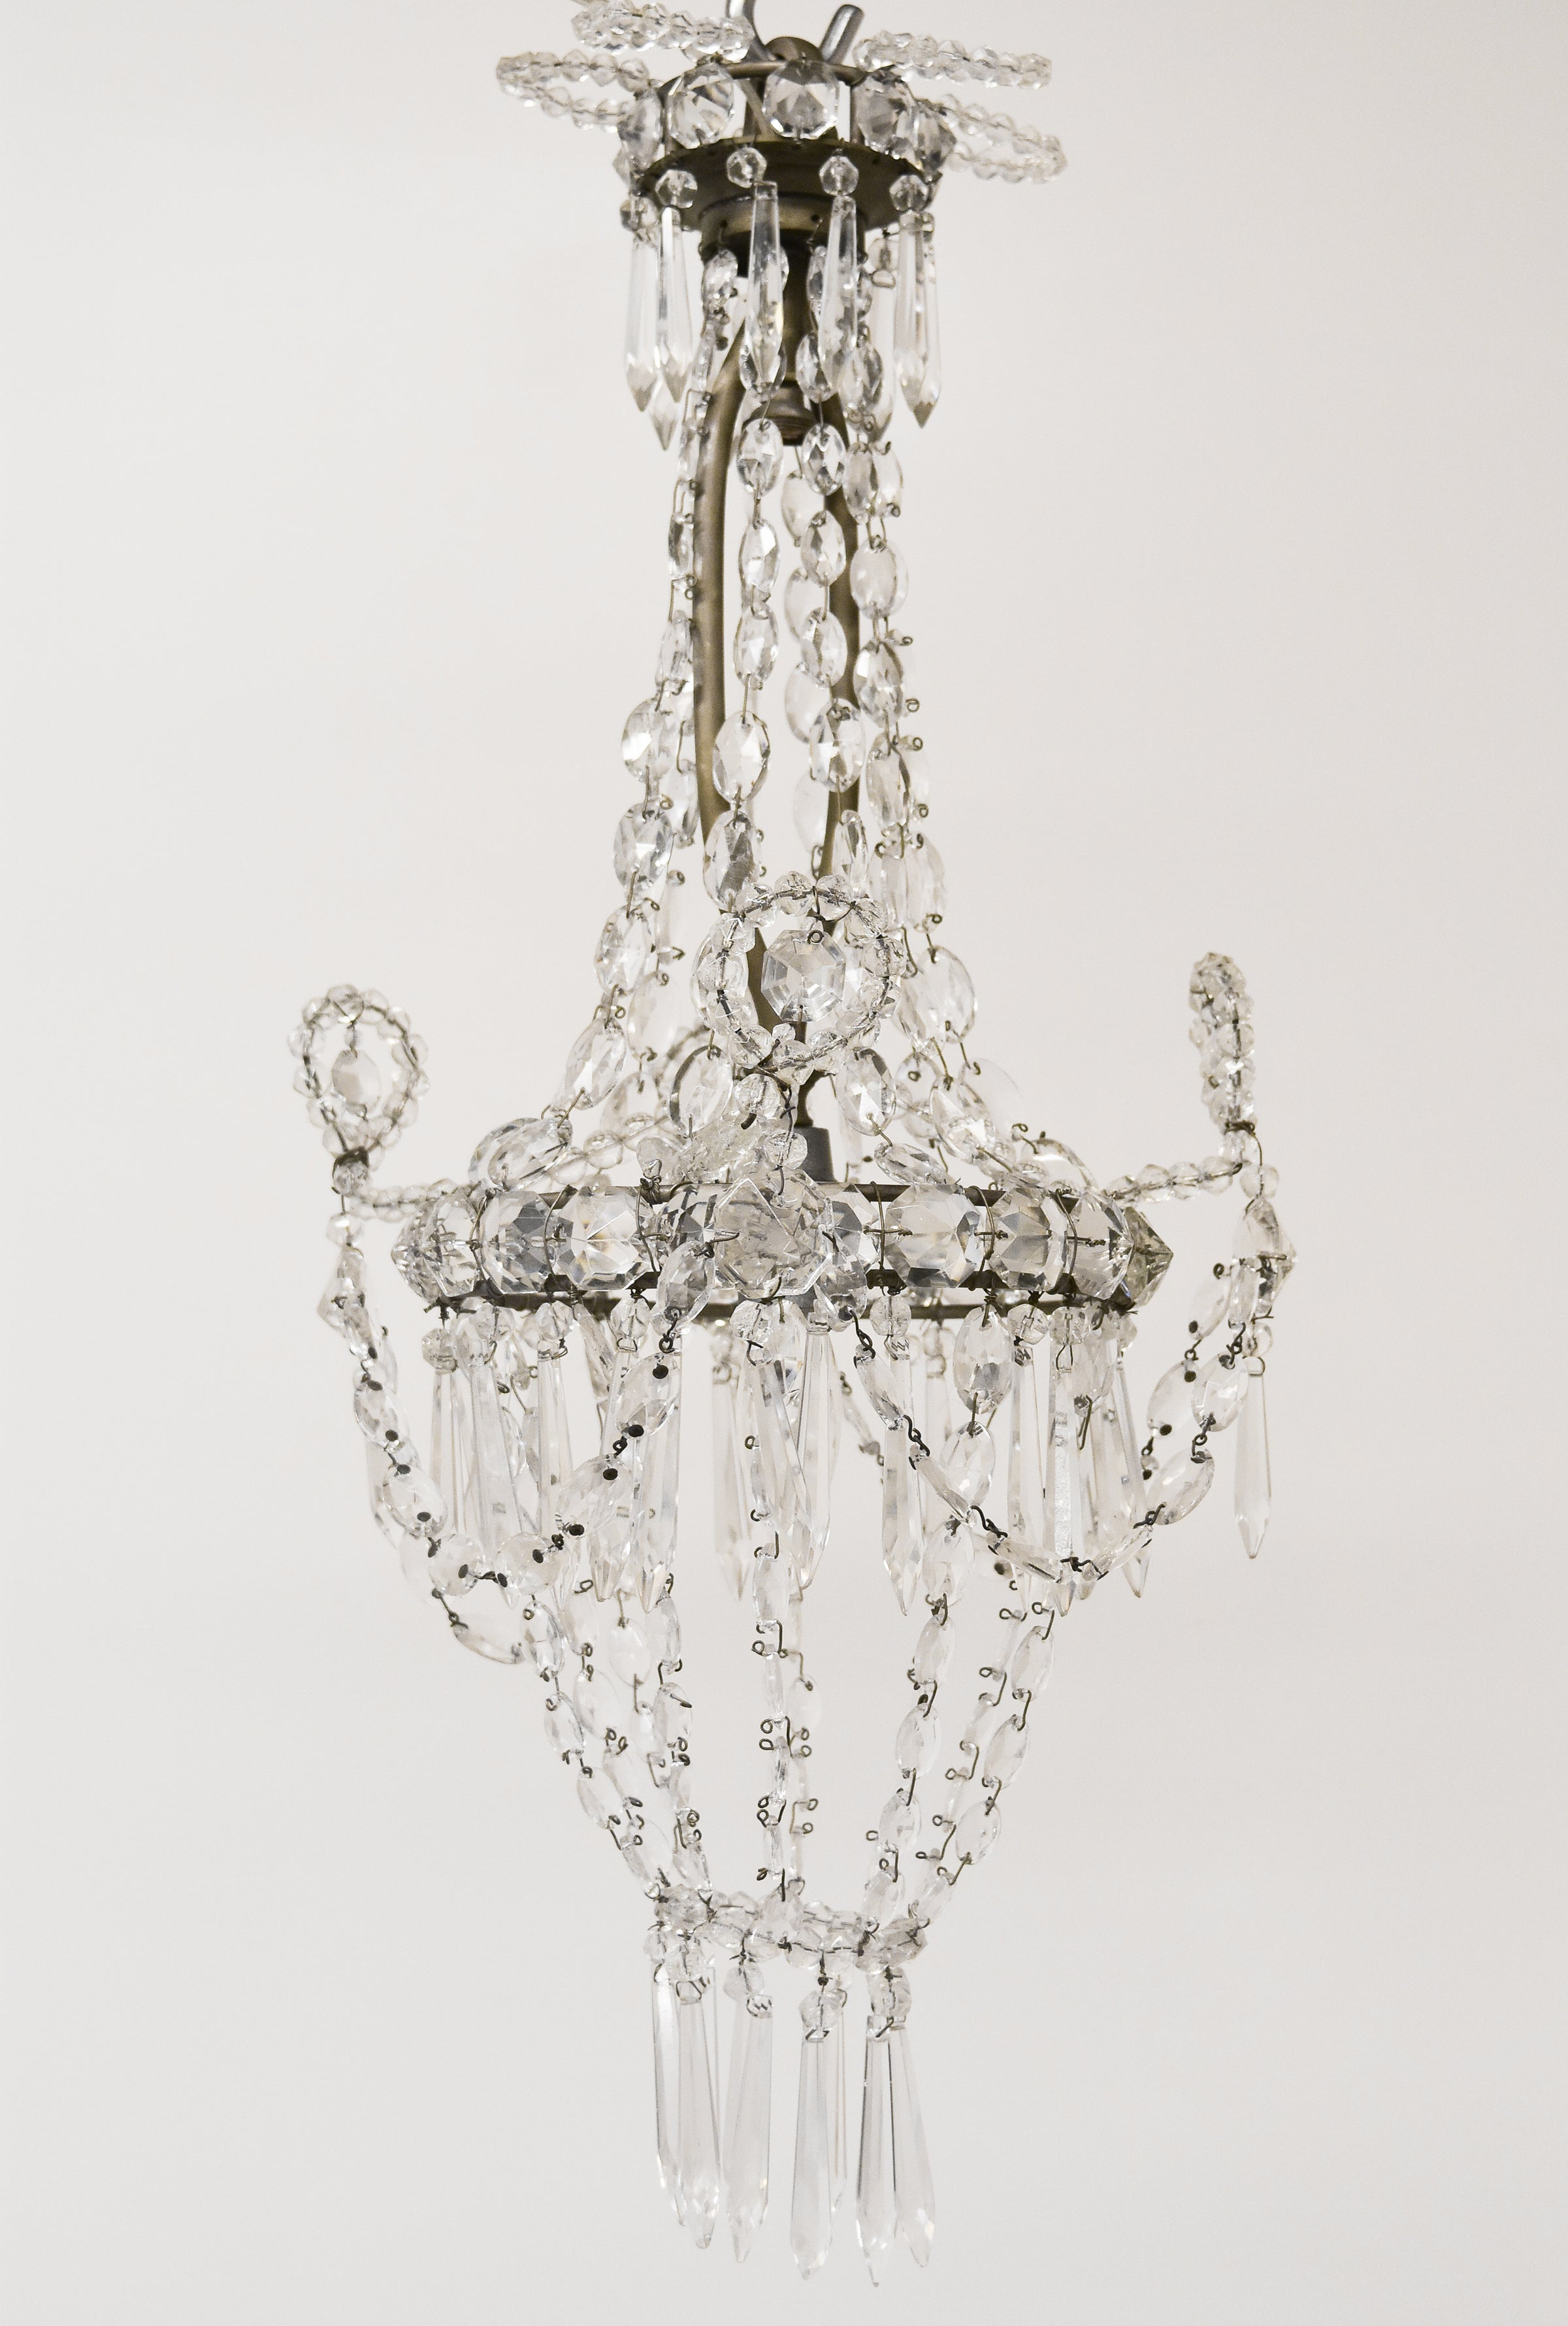 Petite French Crystal Basket Chandelier